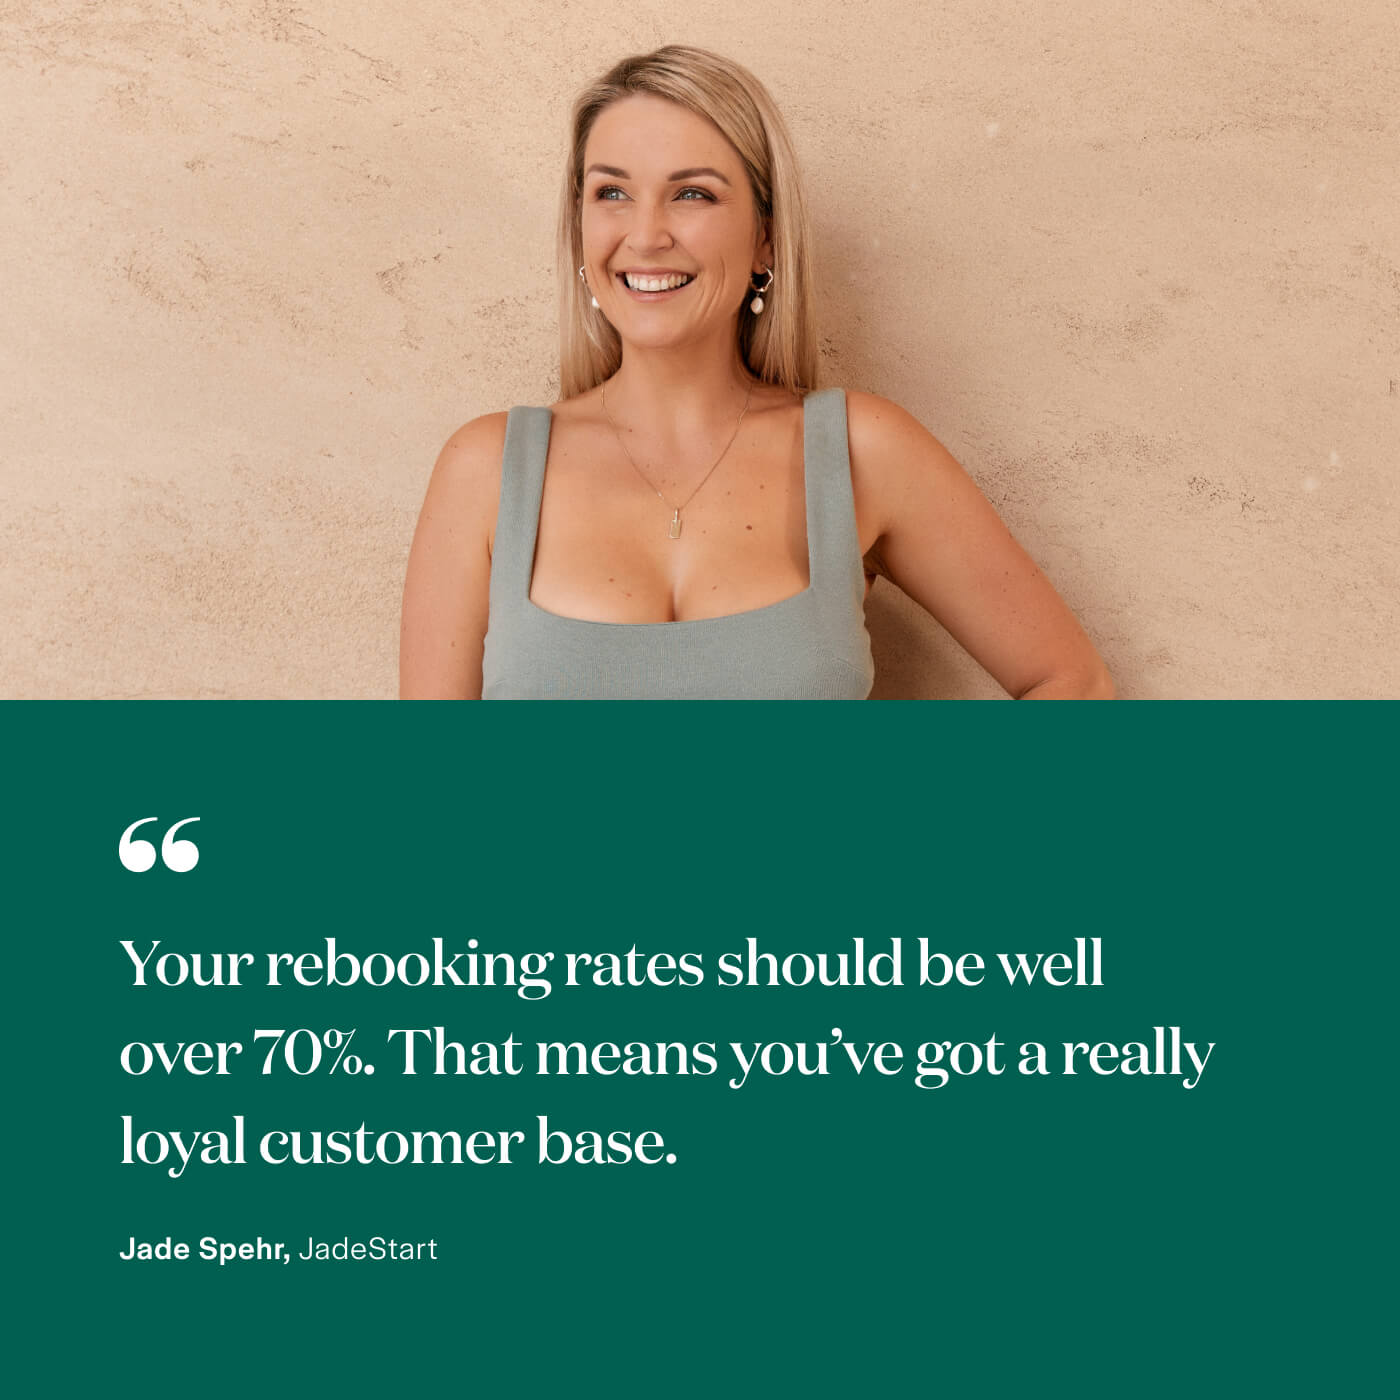 “Your rebooking rates should be well over 70%. That means you’ve got a really loyal customer base.” Jade Spehr, JadeStart